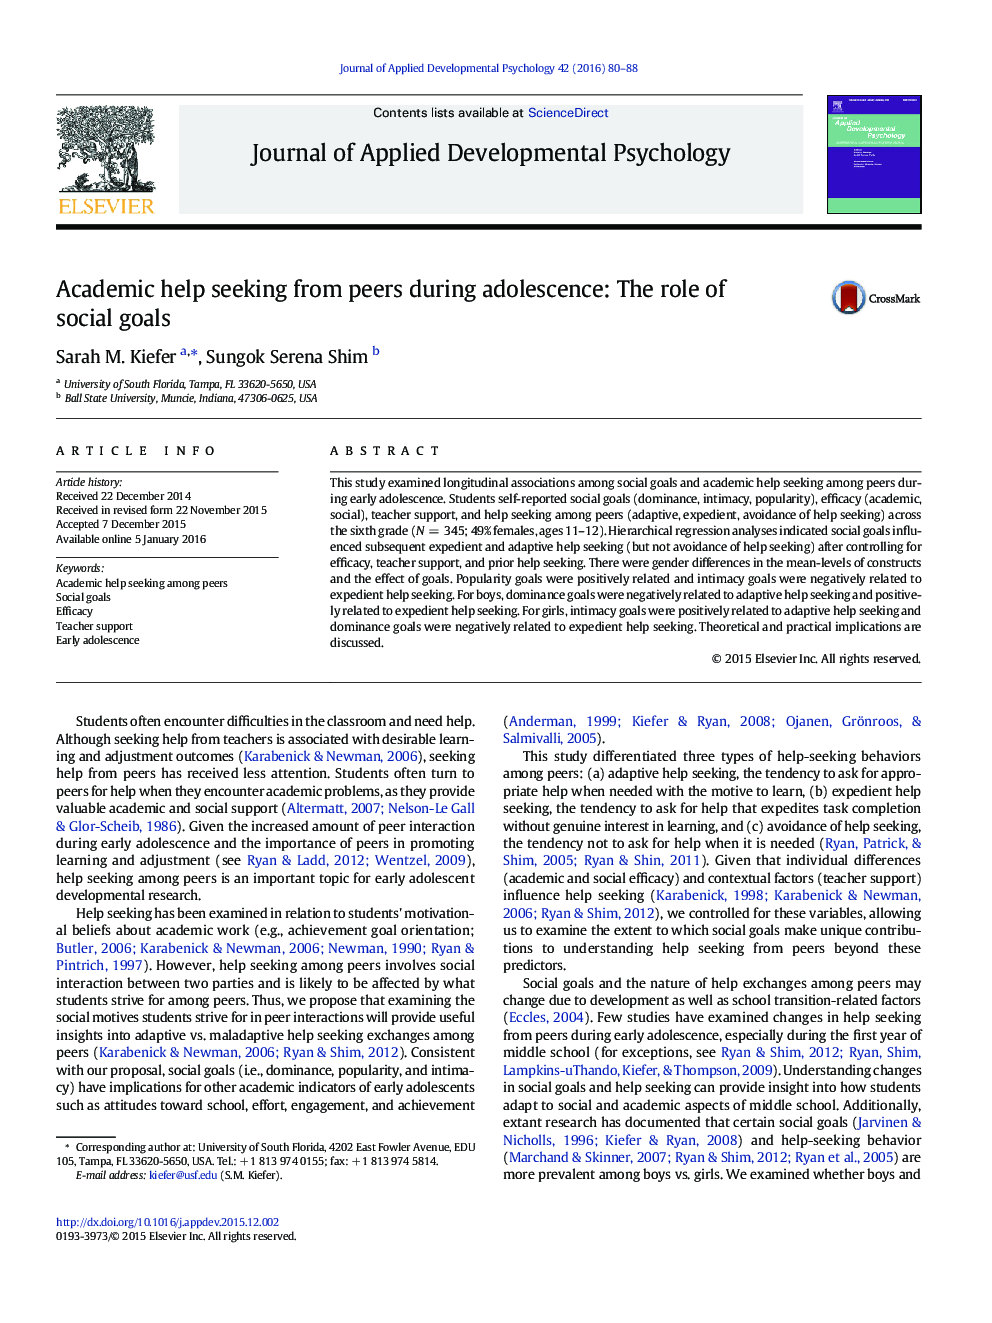 Academic help seeking from peers during adolescence: The role of social goals